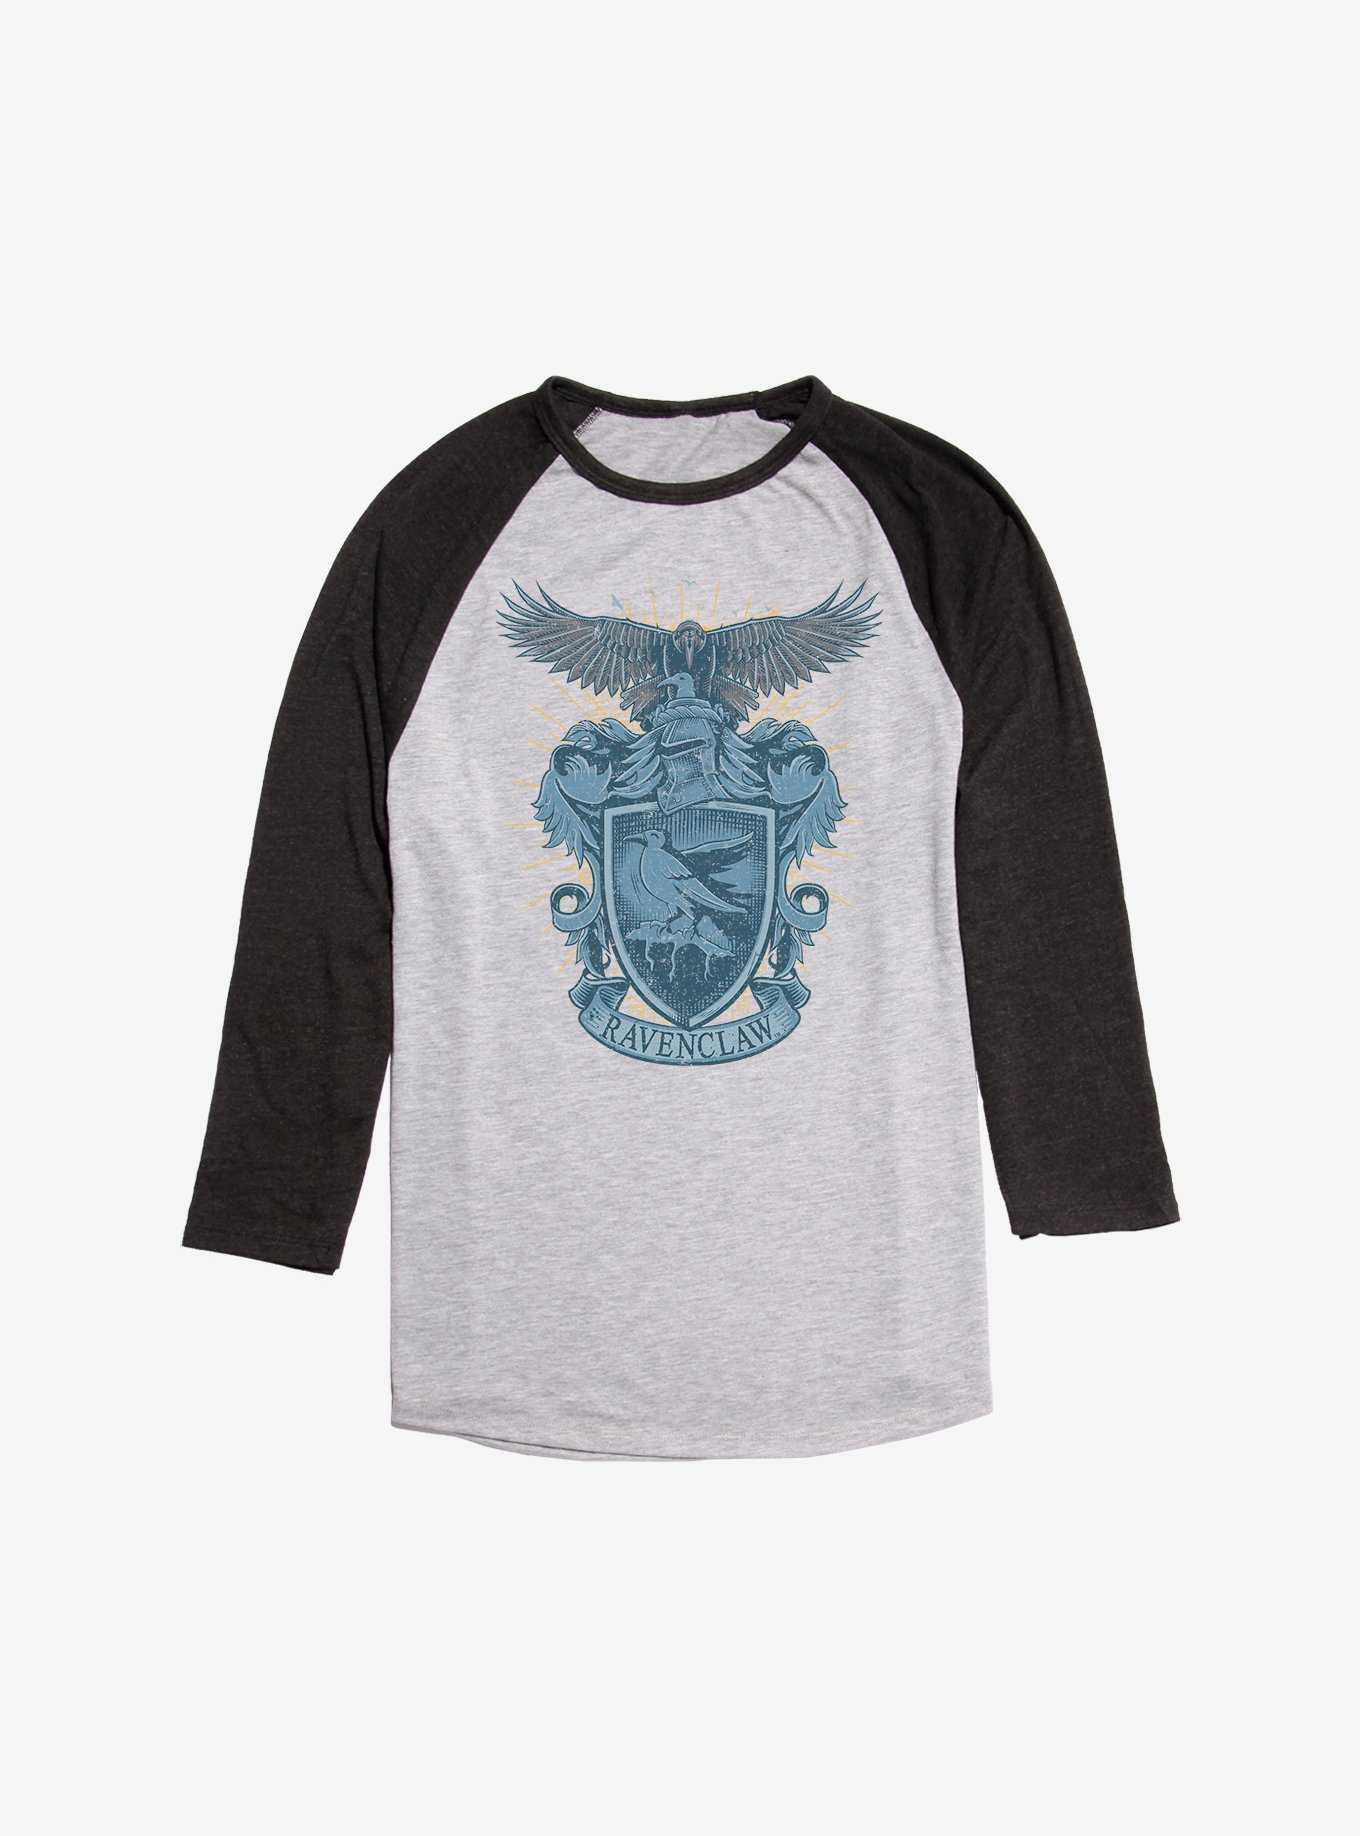 Sweaters BoxLunch Potter OFFICIAL Ravenclaw Harry T-Shirts, & Merch |